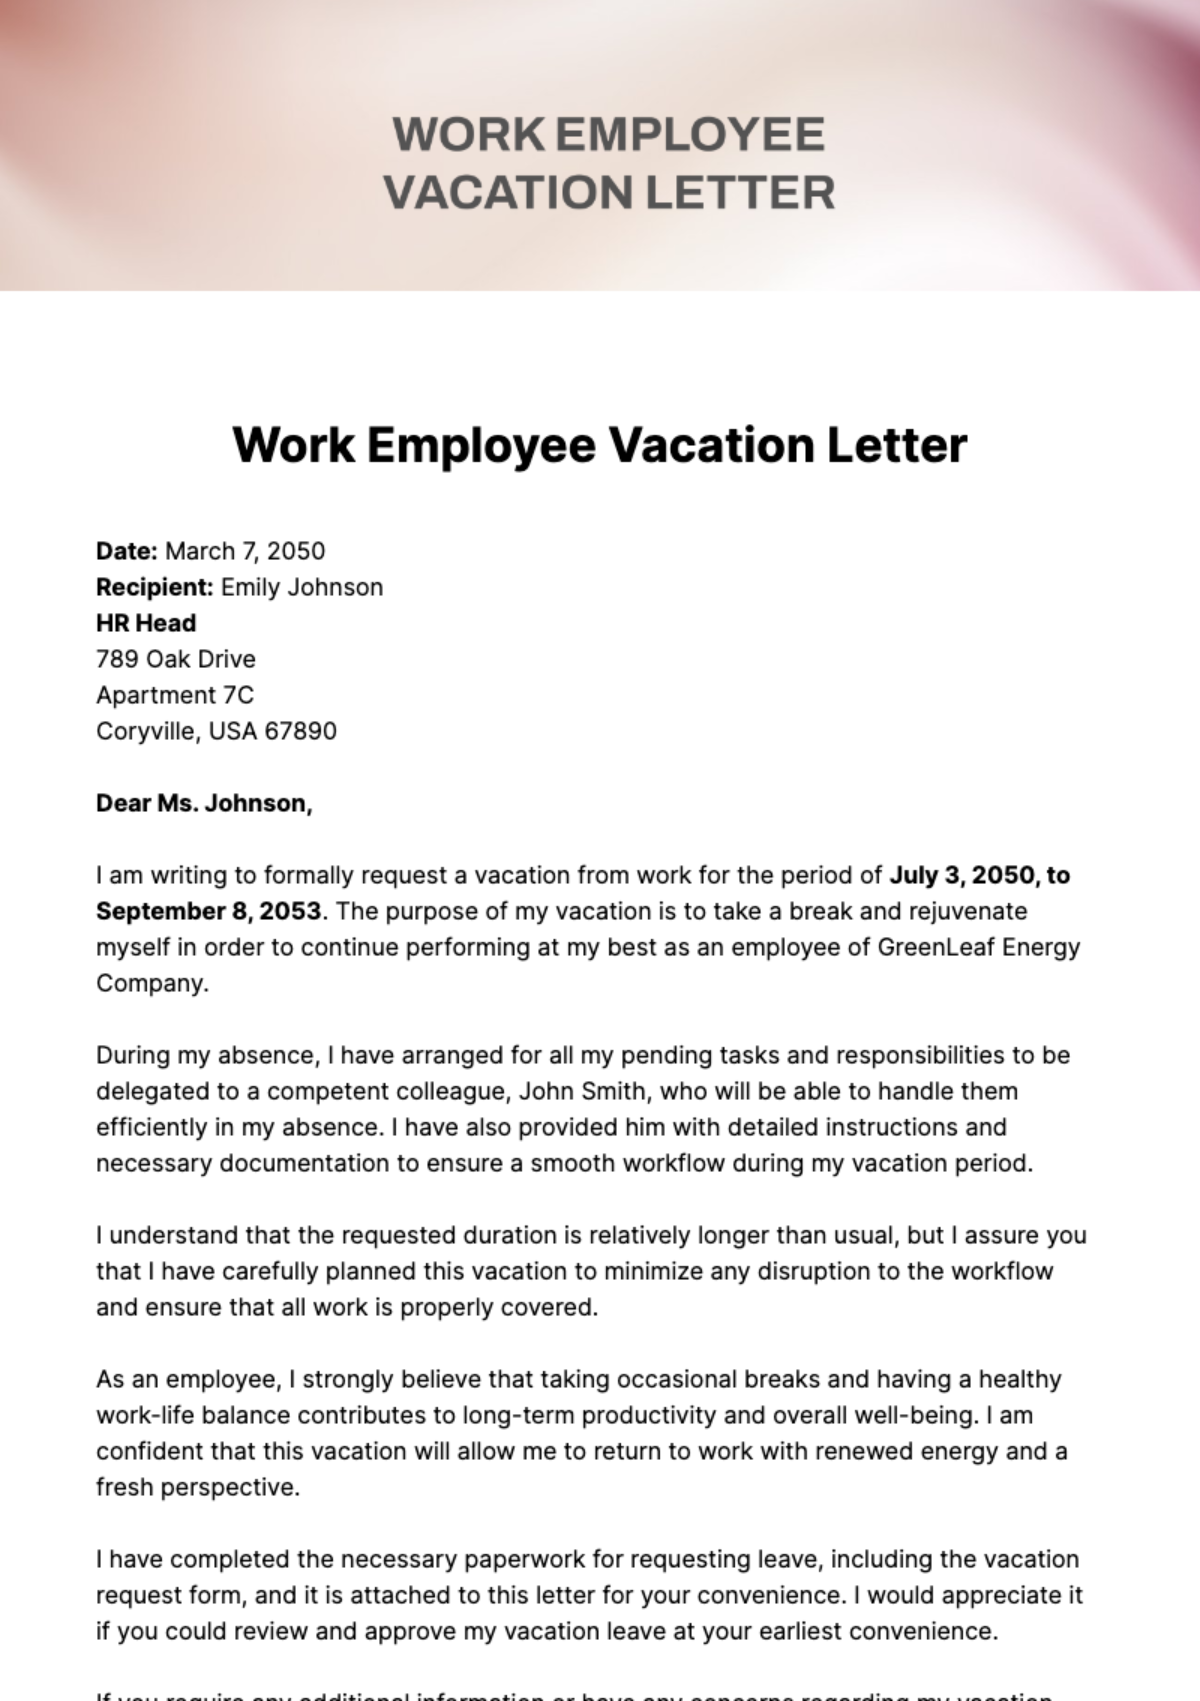 Free Work Employee Vacation Letter Template